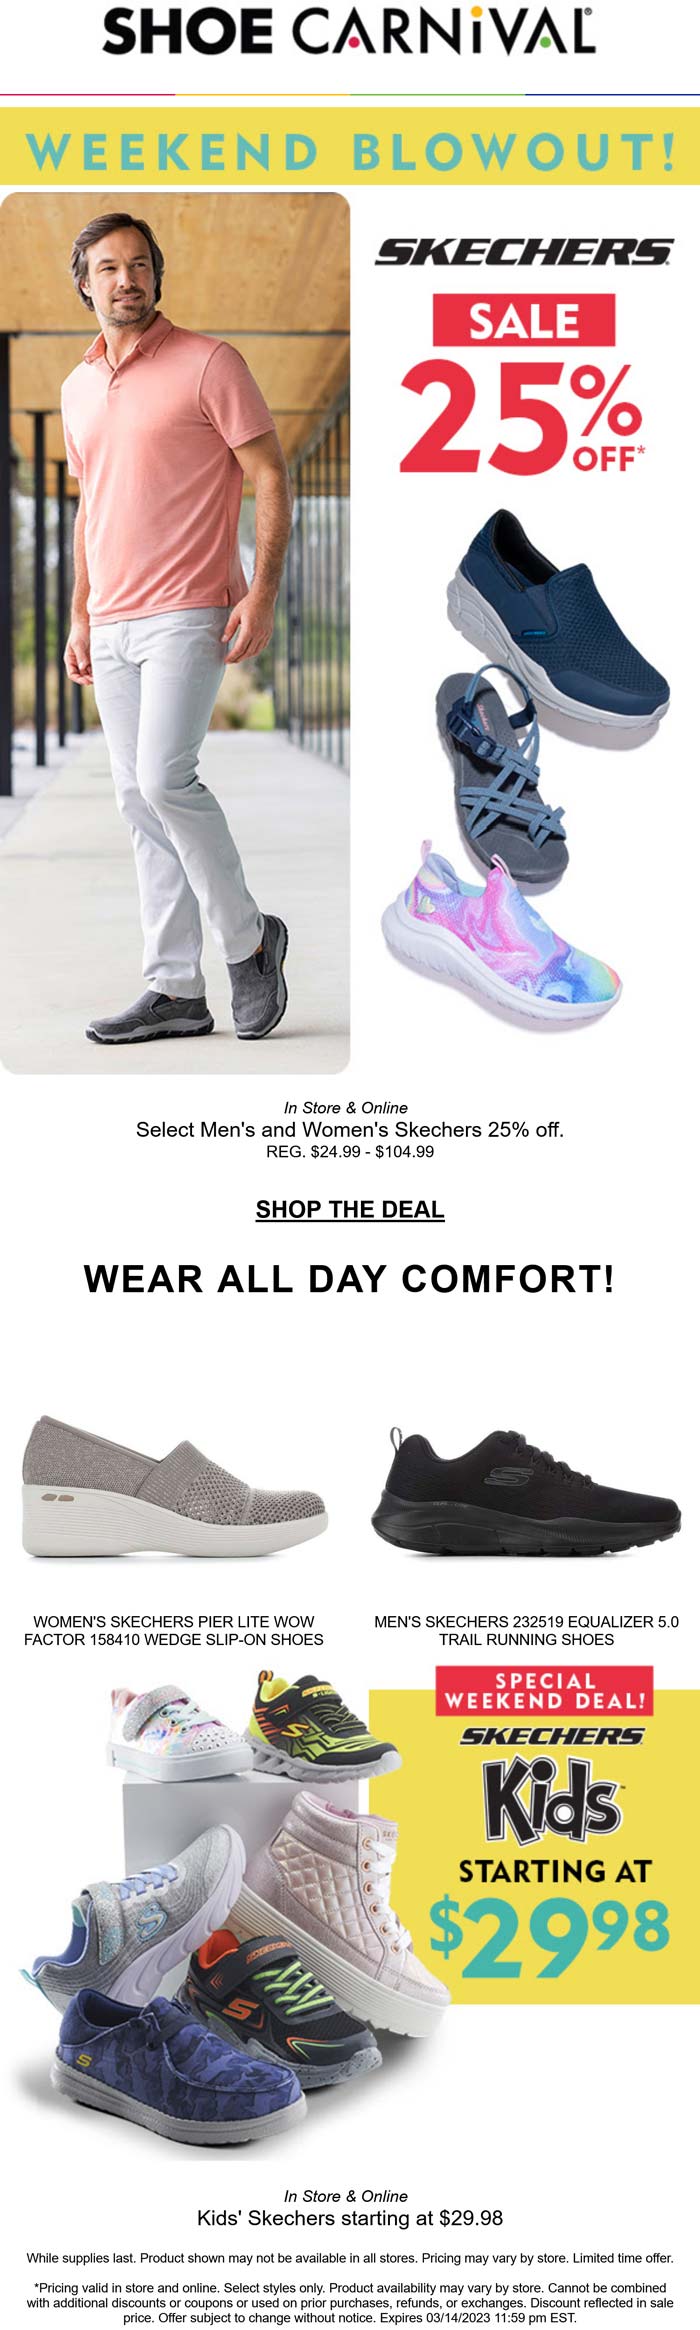 Shoe Carnival stores Coupon  25% off Skechers at Shoe Carnival, ditto online #shoecarnival 